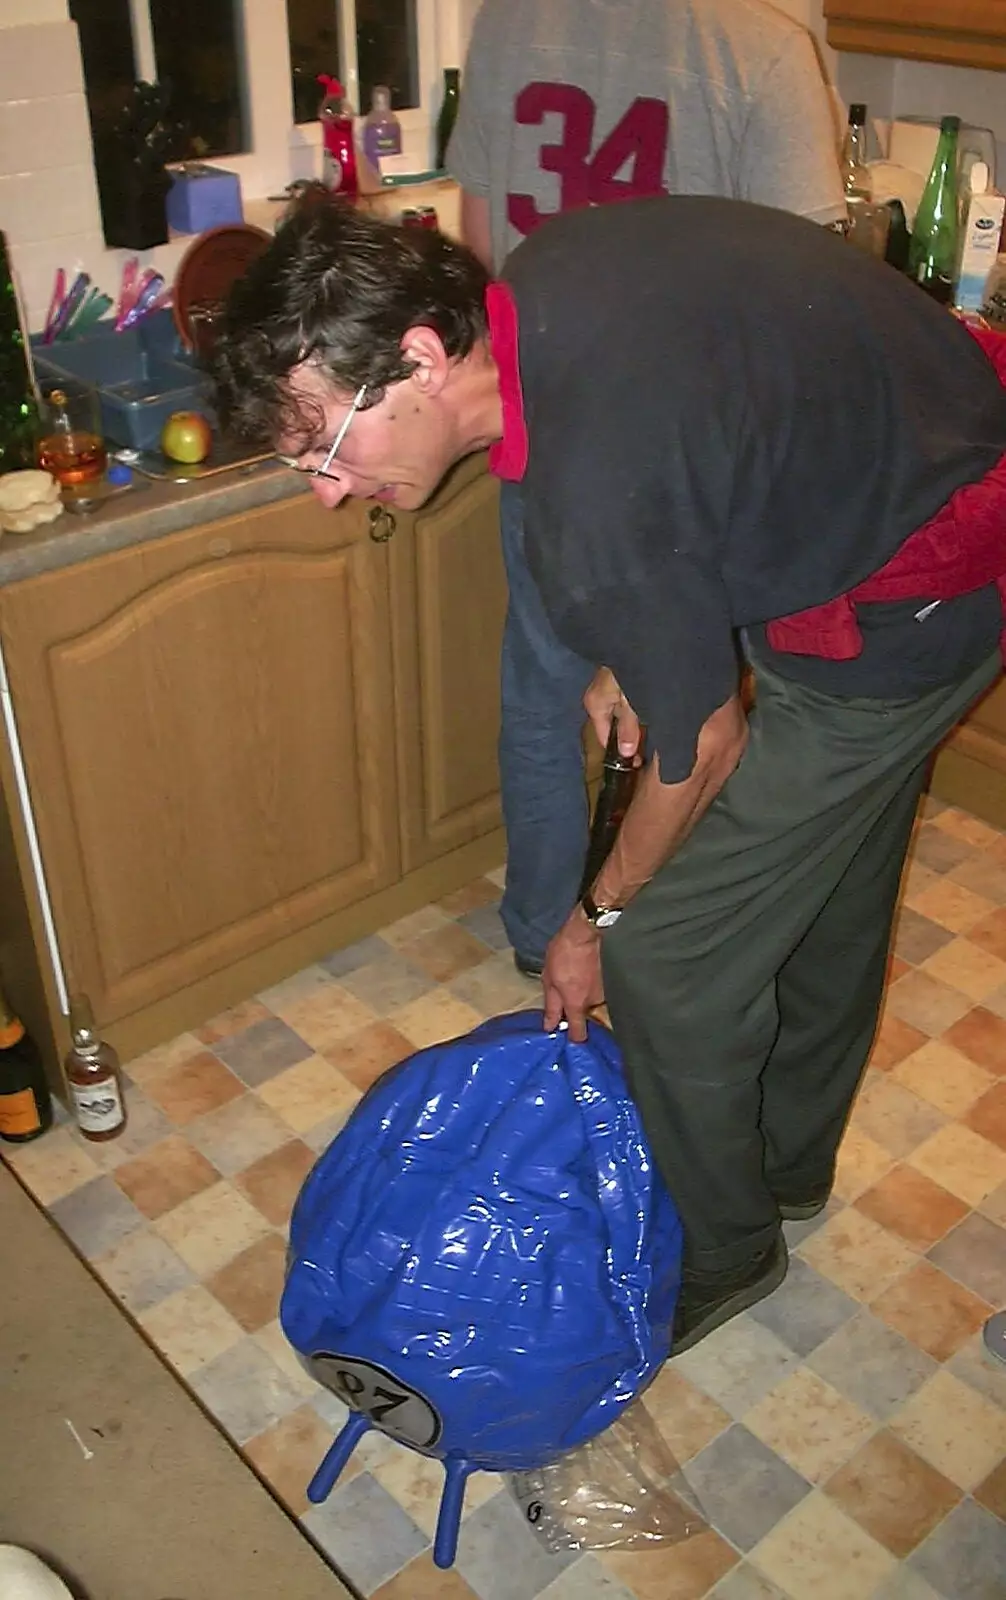 A space hopper is prepared, from The BSCC in Debenham, and Bill's Housewarming Barbie, Yaxley, Suffolk - 31st July 2004